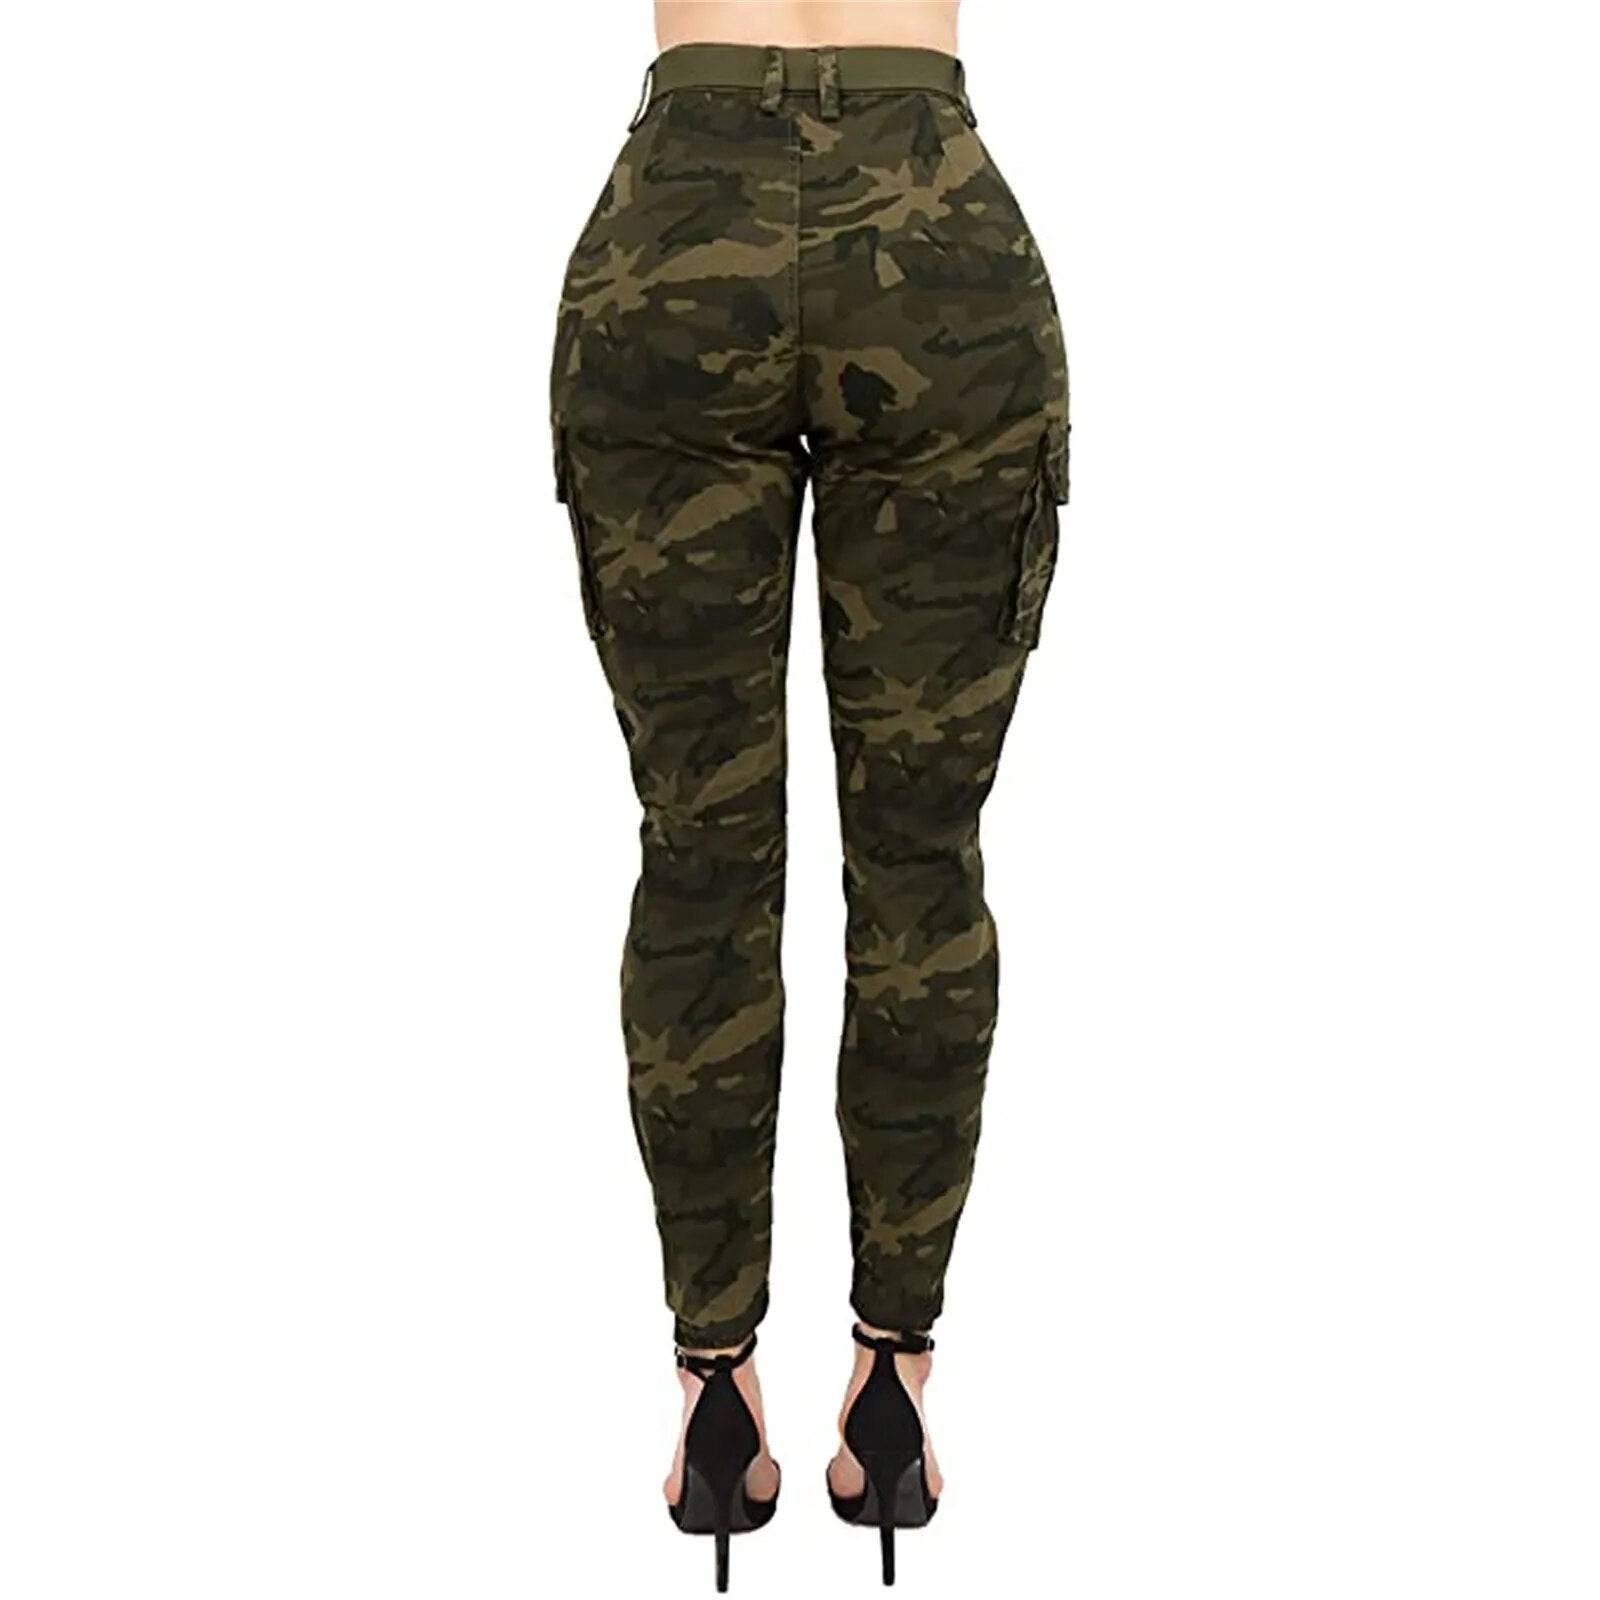 "Chic Camo Cargo Pants Set with Belt - Trendy Women's Slim Fit Joggers for Winter/Autumn"